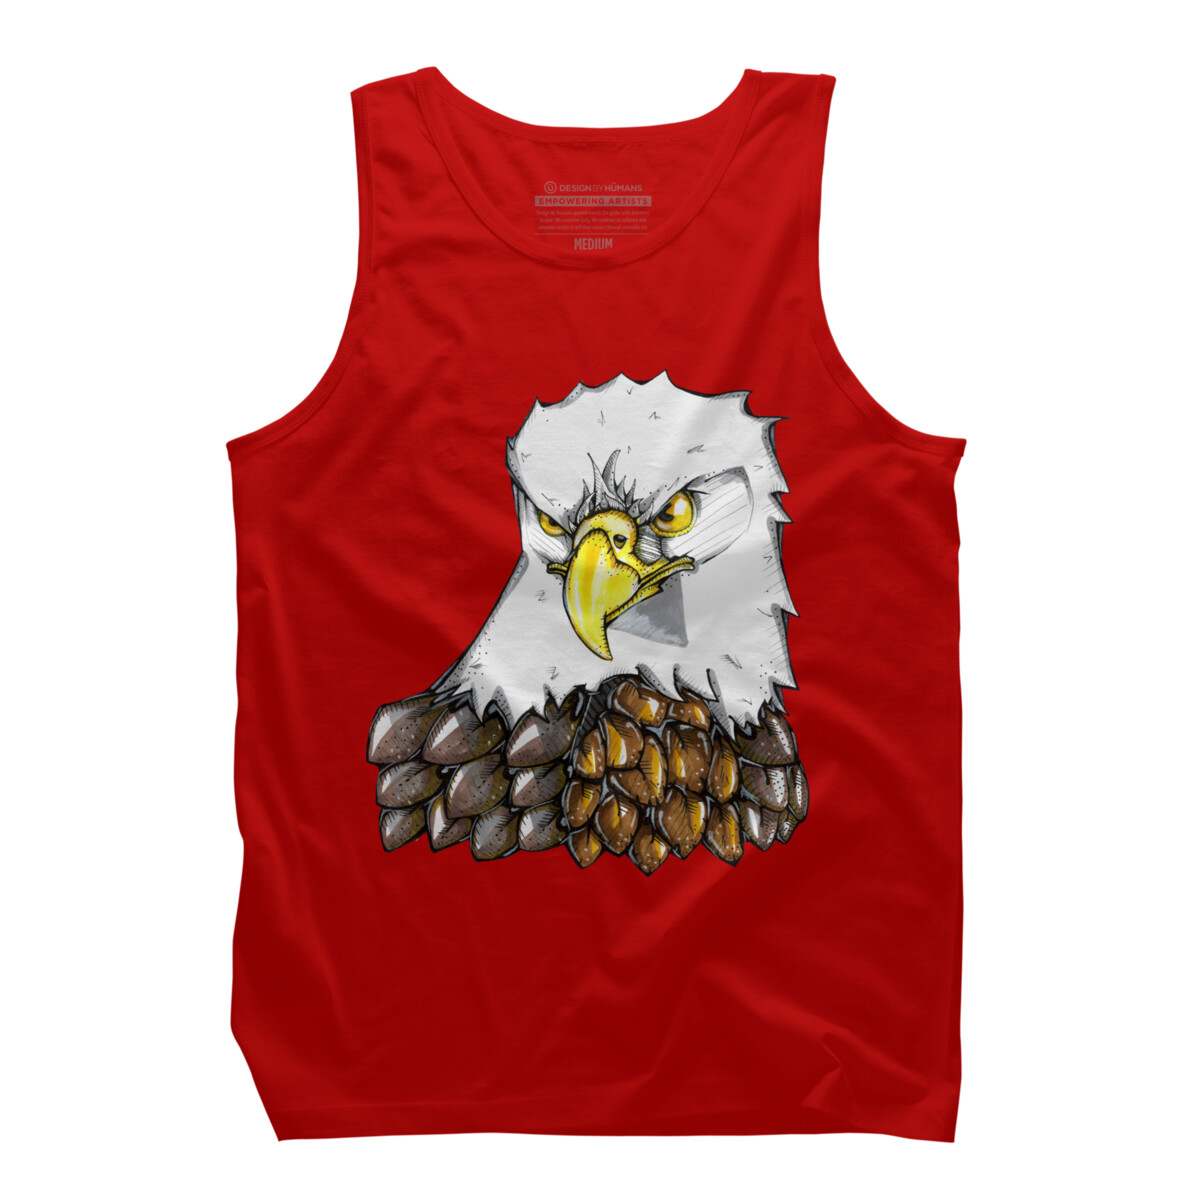 Maverick the Bald Eagle Mens Red Graphic Tank Top - Design By Humans  2XL - image 1 of 3